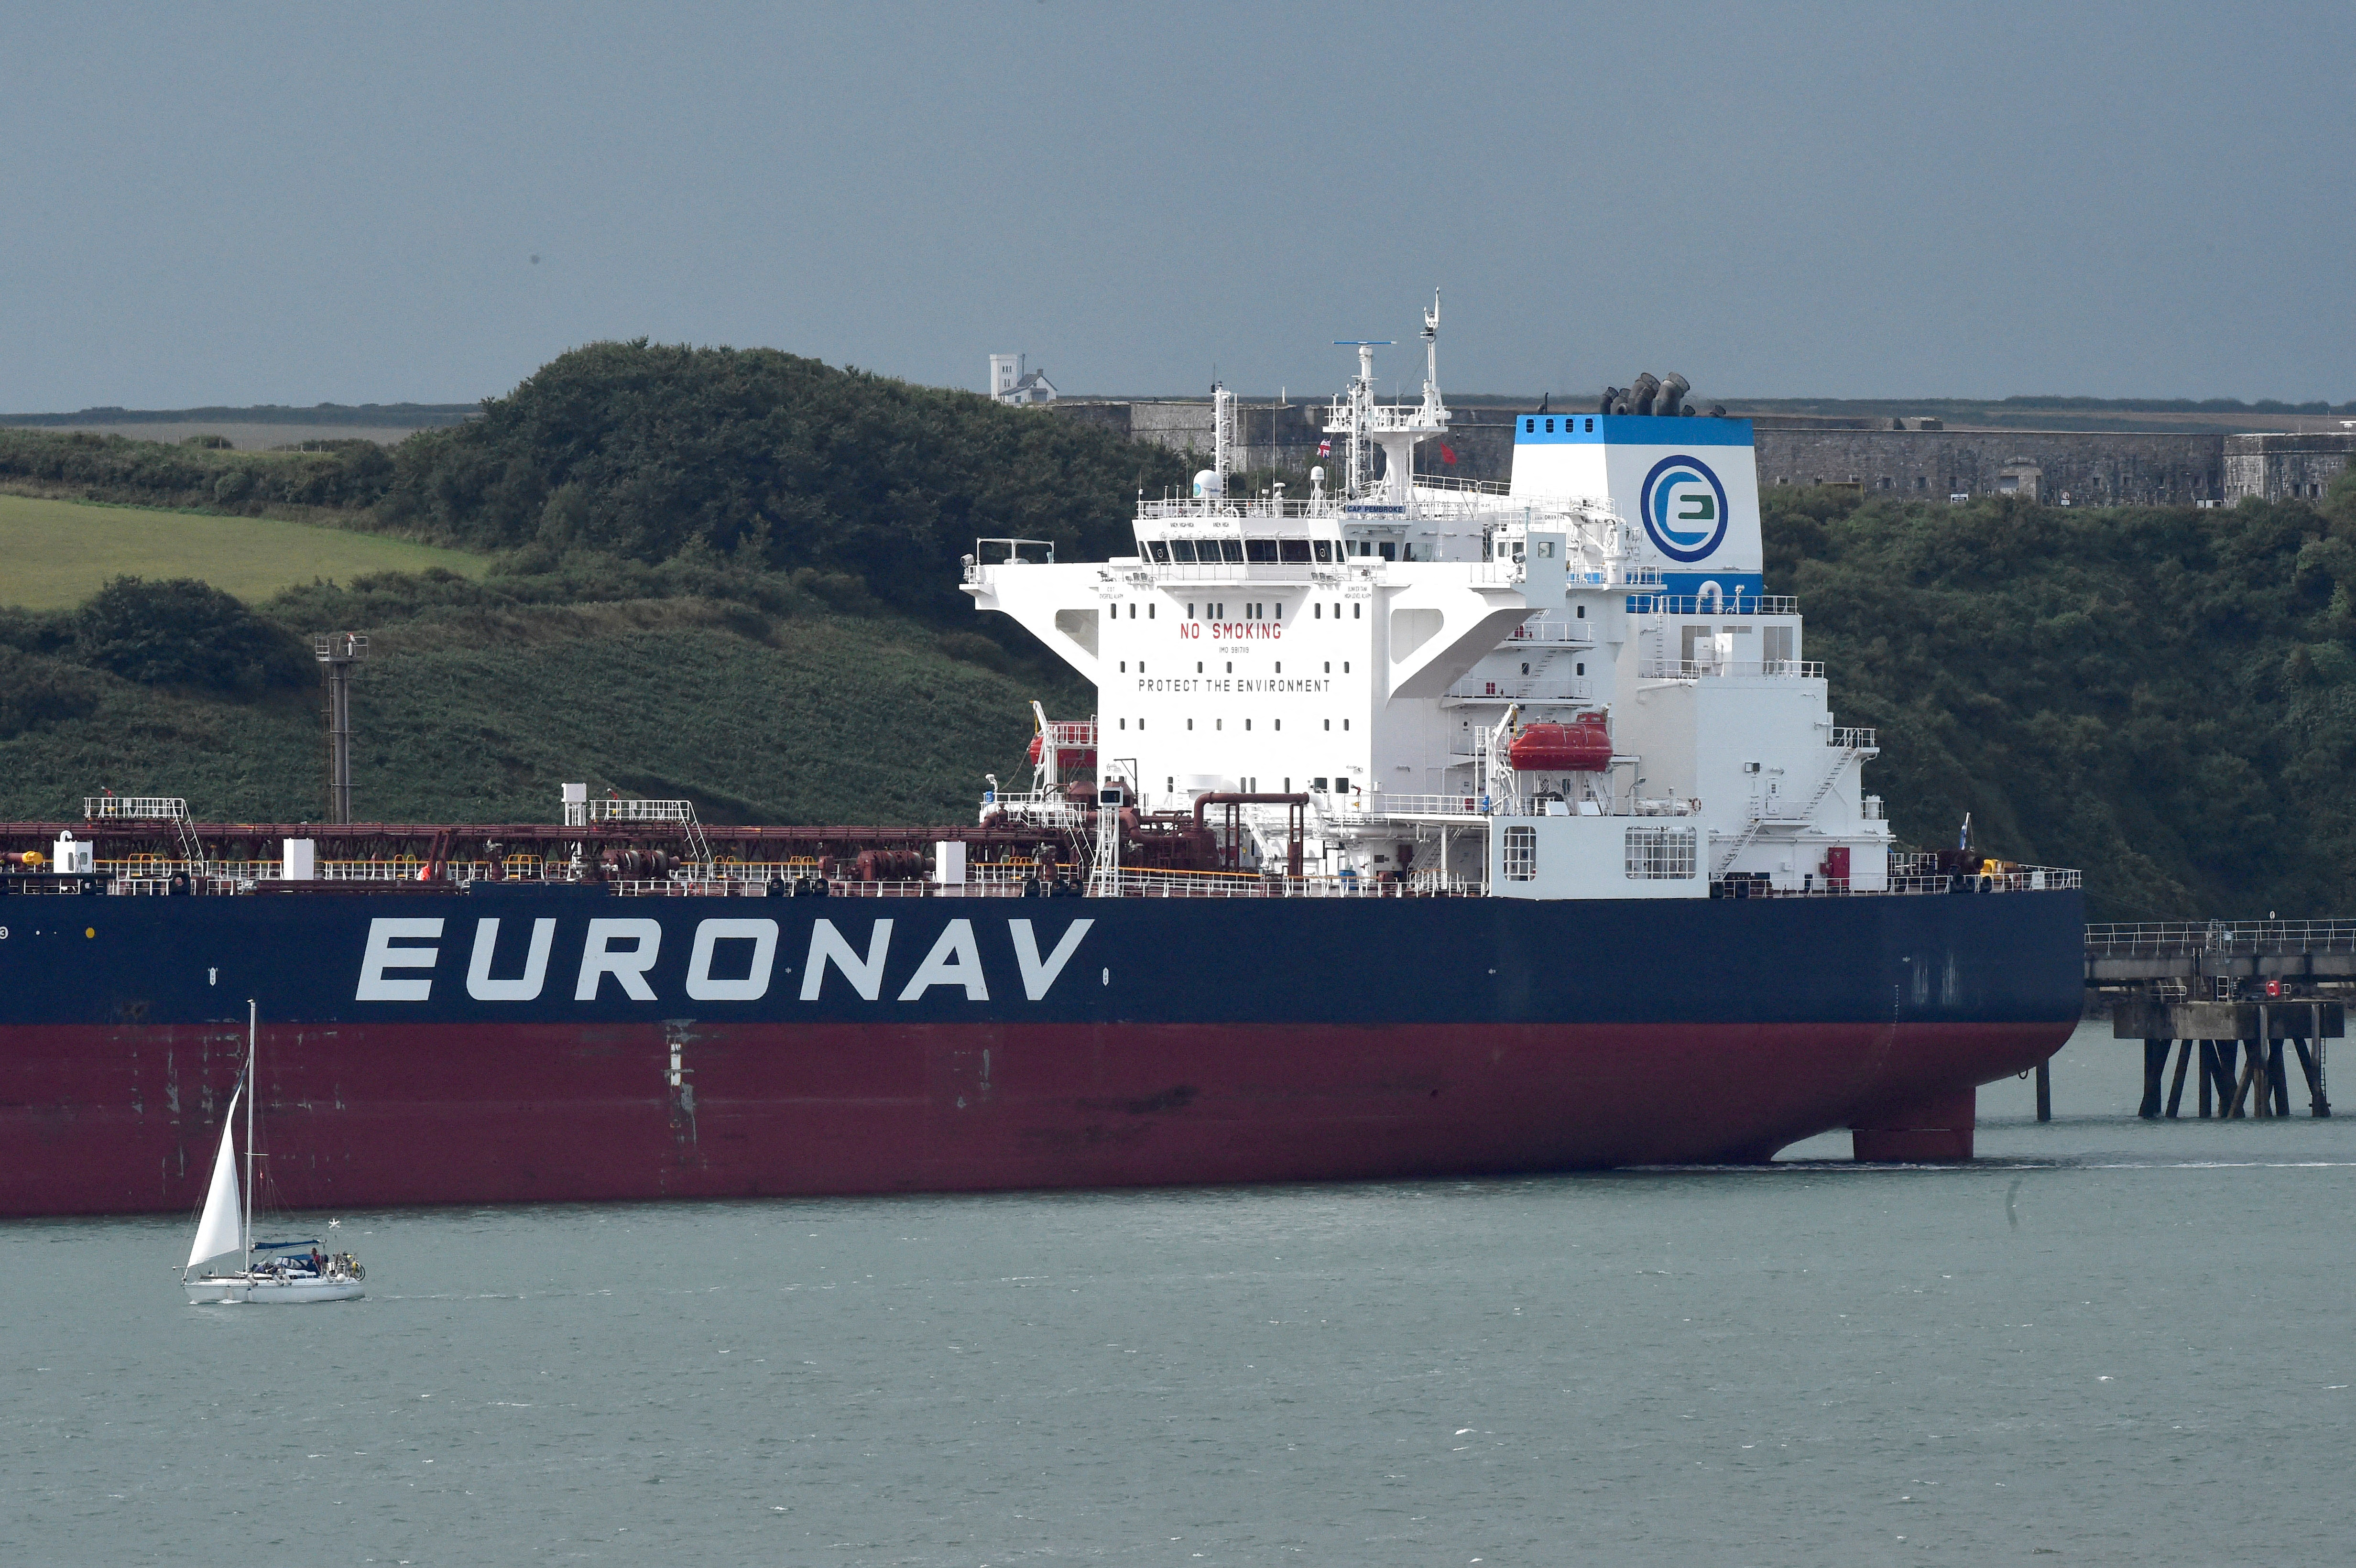 The "Cap Pembroke"  a VLCC (very large crude carrier), owned by Euronav, the largest NYSE listed independent crude oil tanker company in the world, berthed at the Valero oil terminal at Pembroke in the Port of Milford Haven